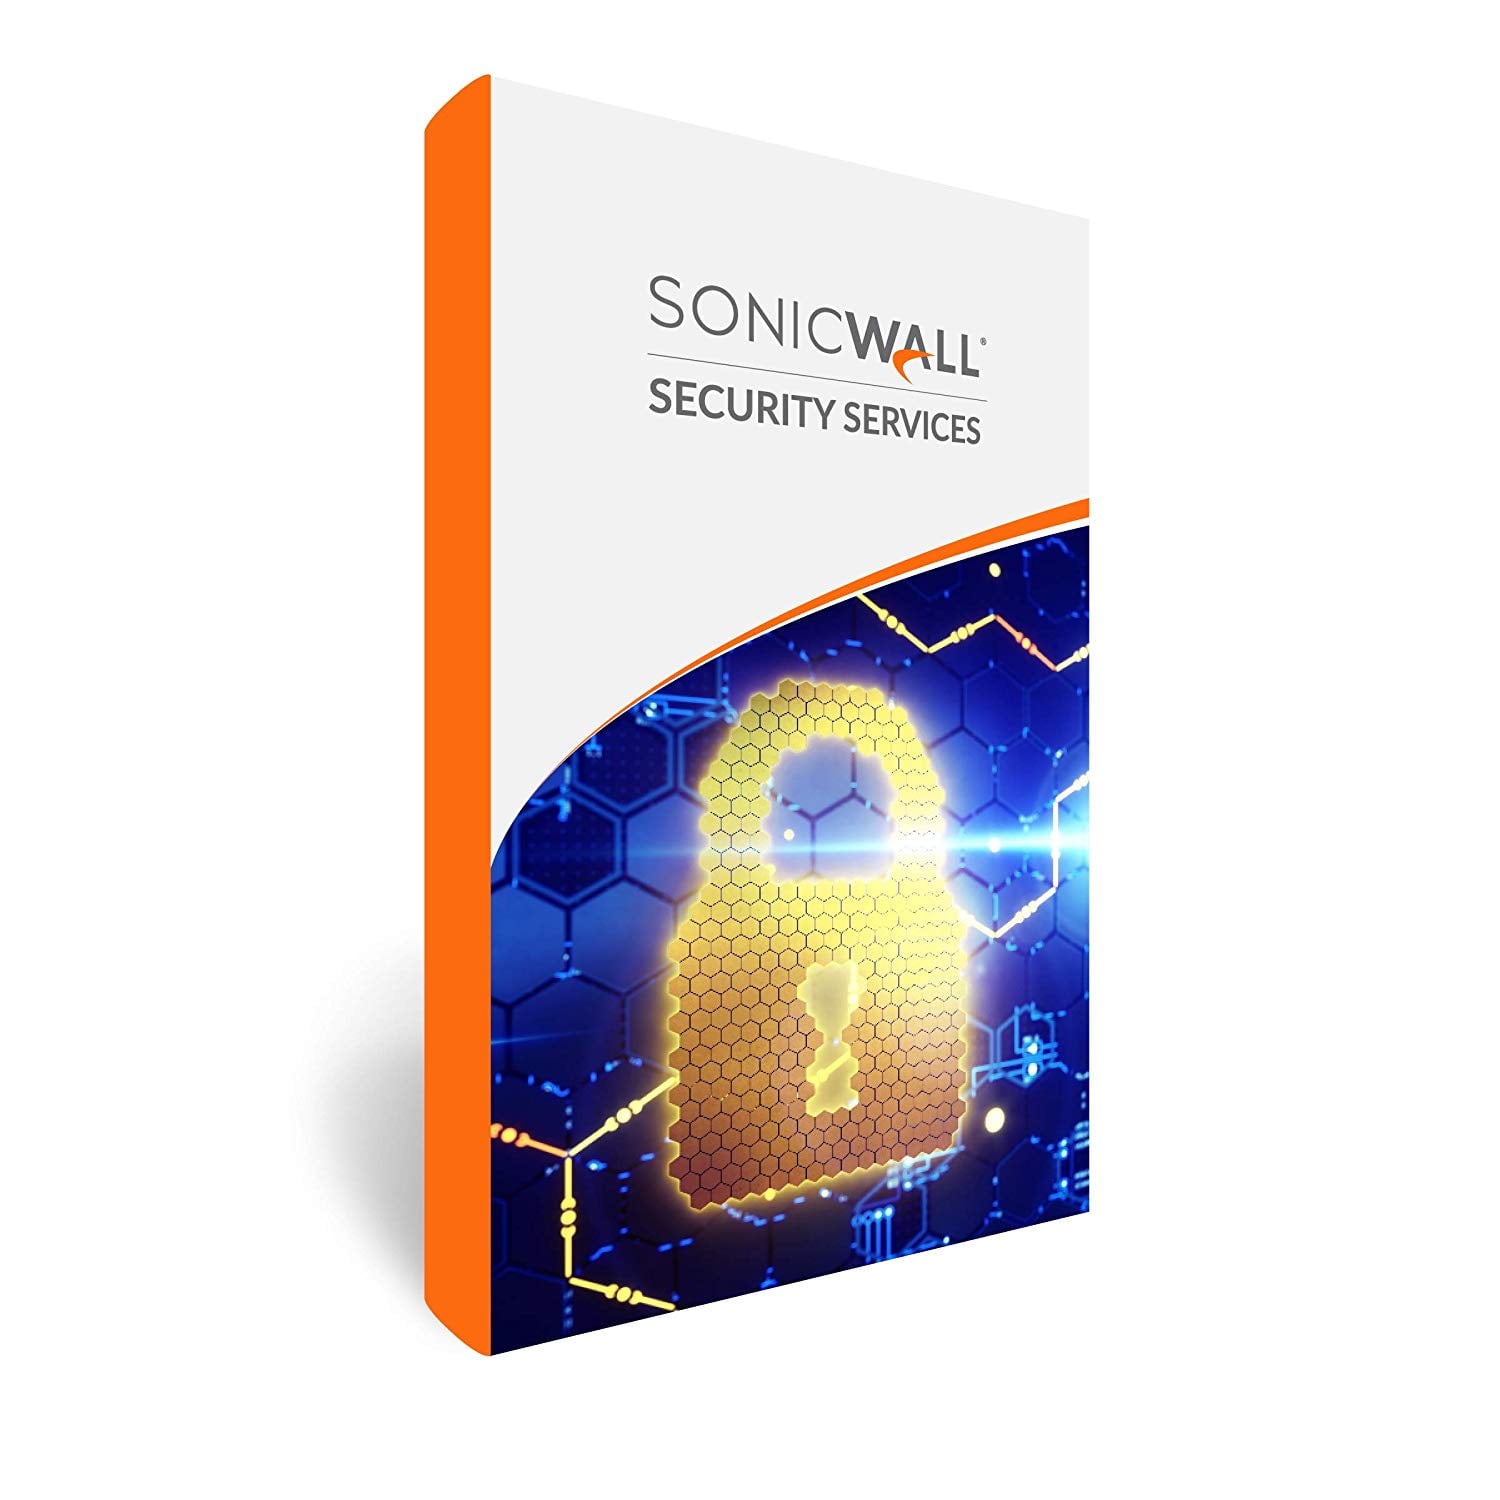 SonicWall TZ400 3YR 24x7 Support 01-SSC-0554 